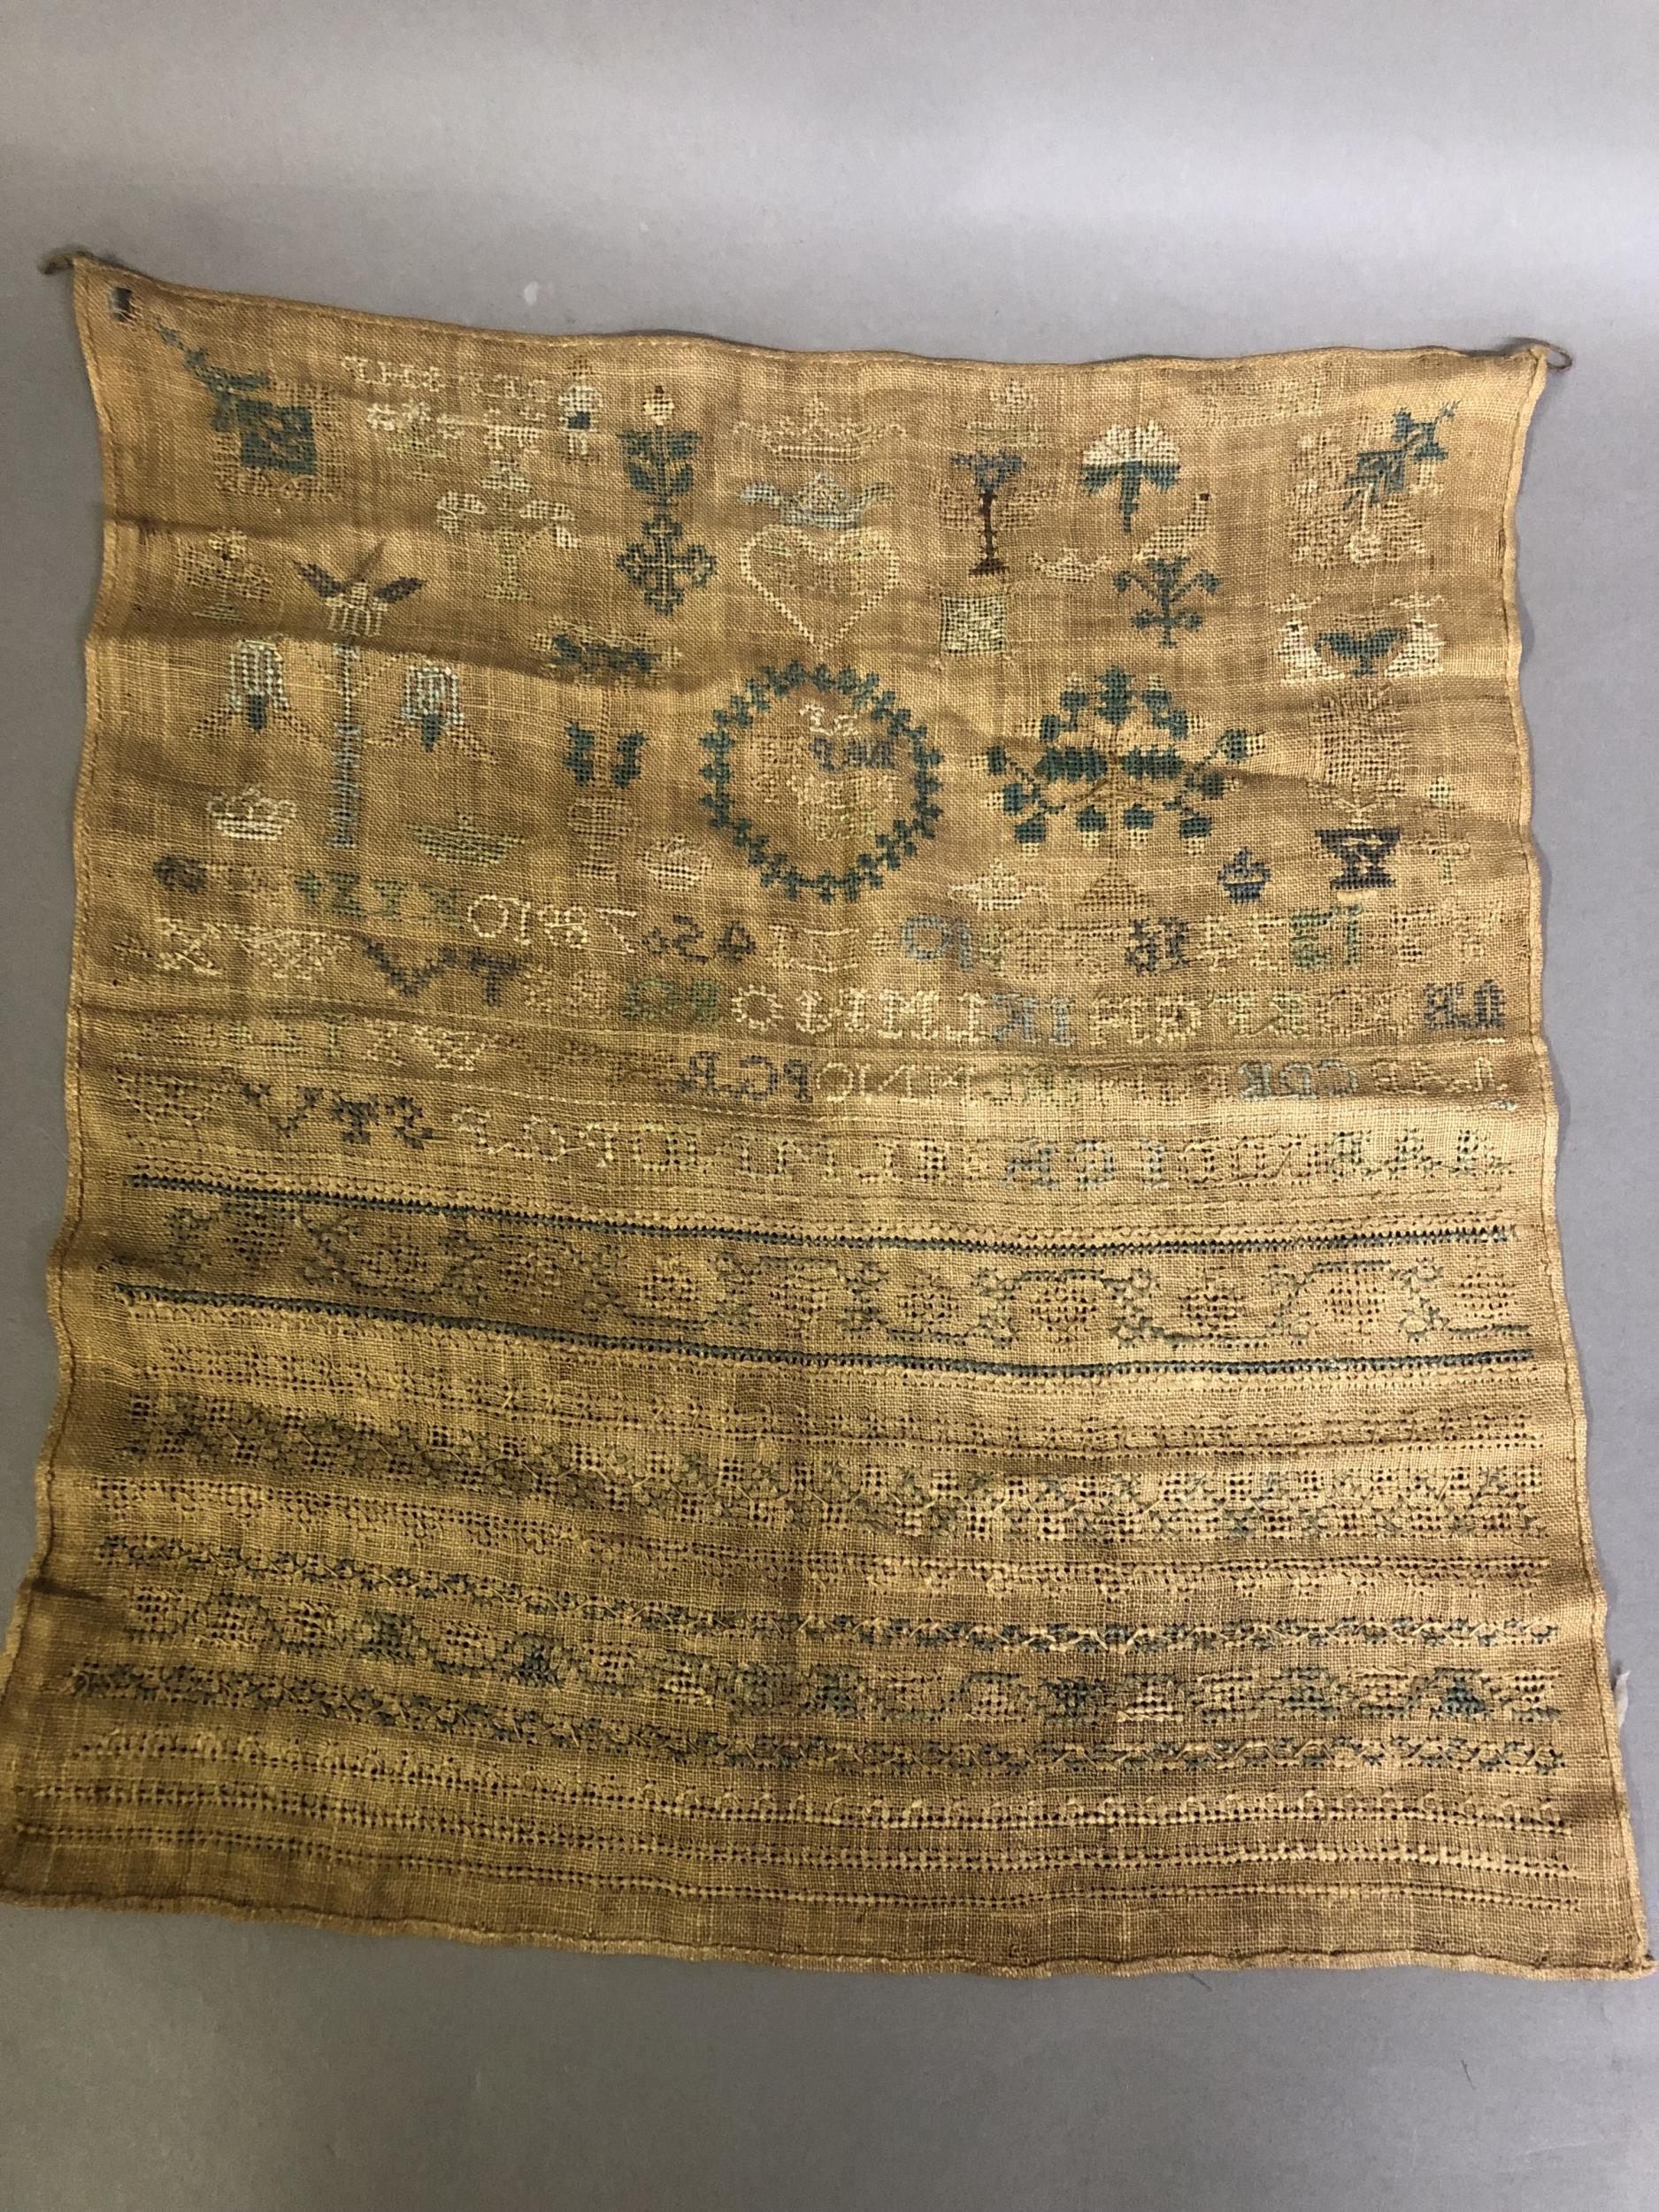 Needlework samplers, two, the first in 18th century band sampler form, on linen, worked with more - Image 2 of 2